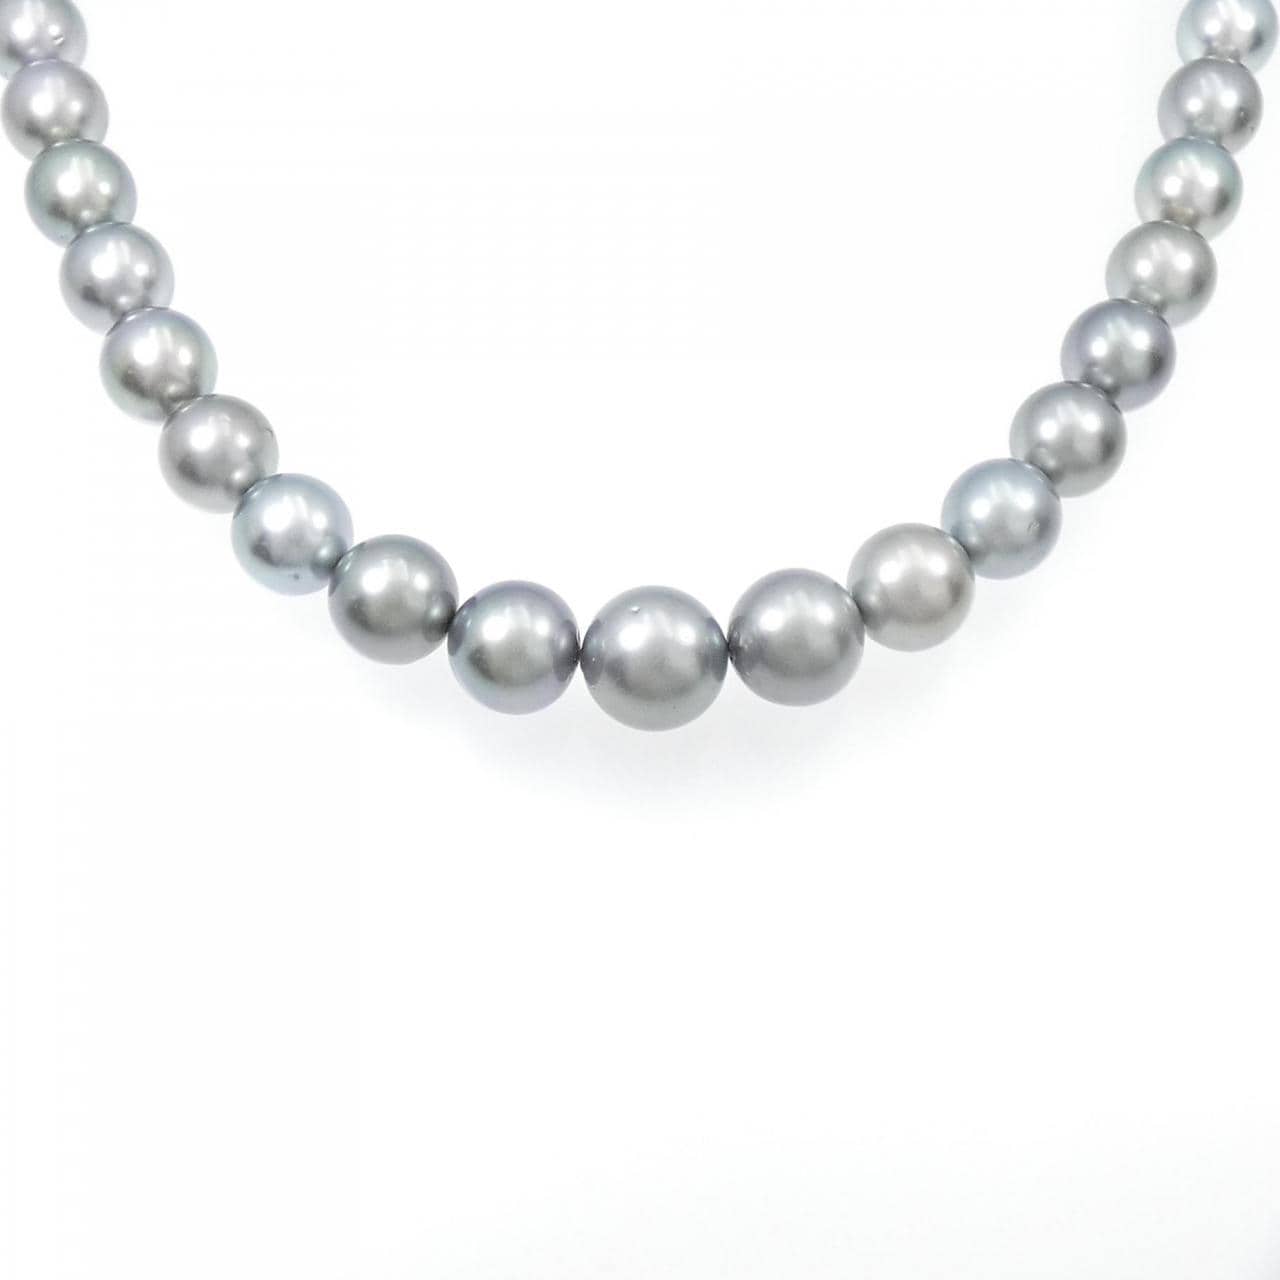 Silver clasp black butterfly pearl necklace 11-14.4mm